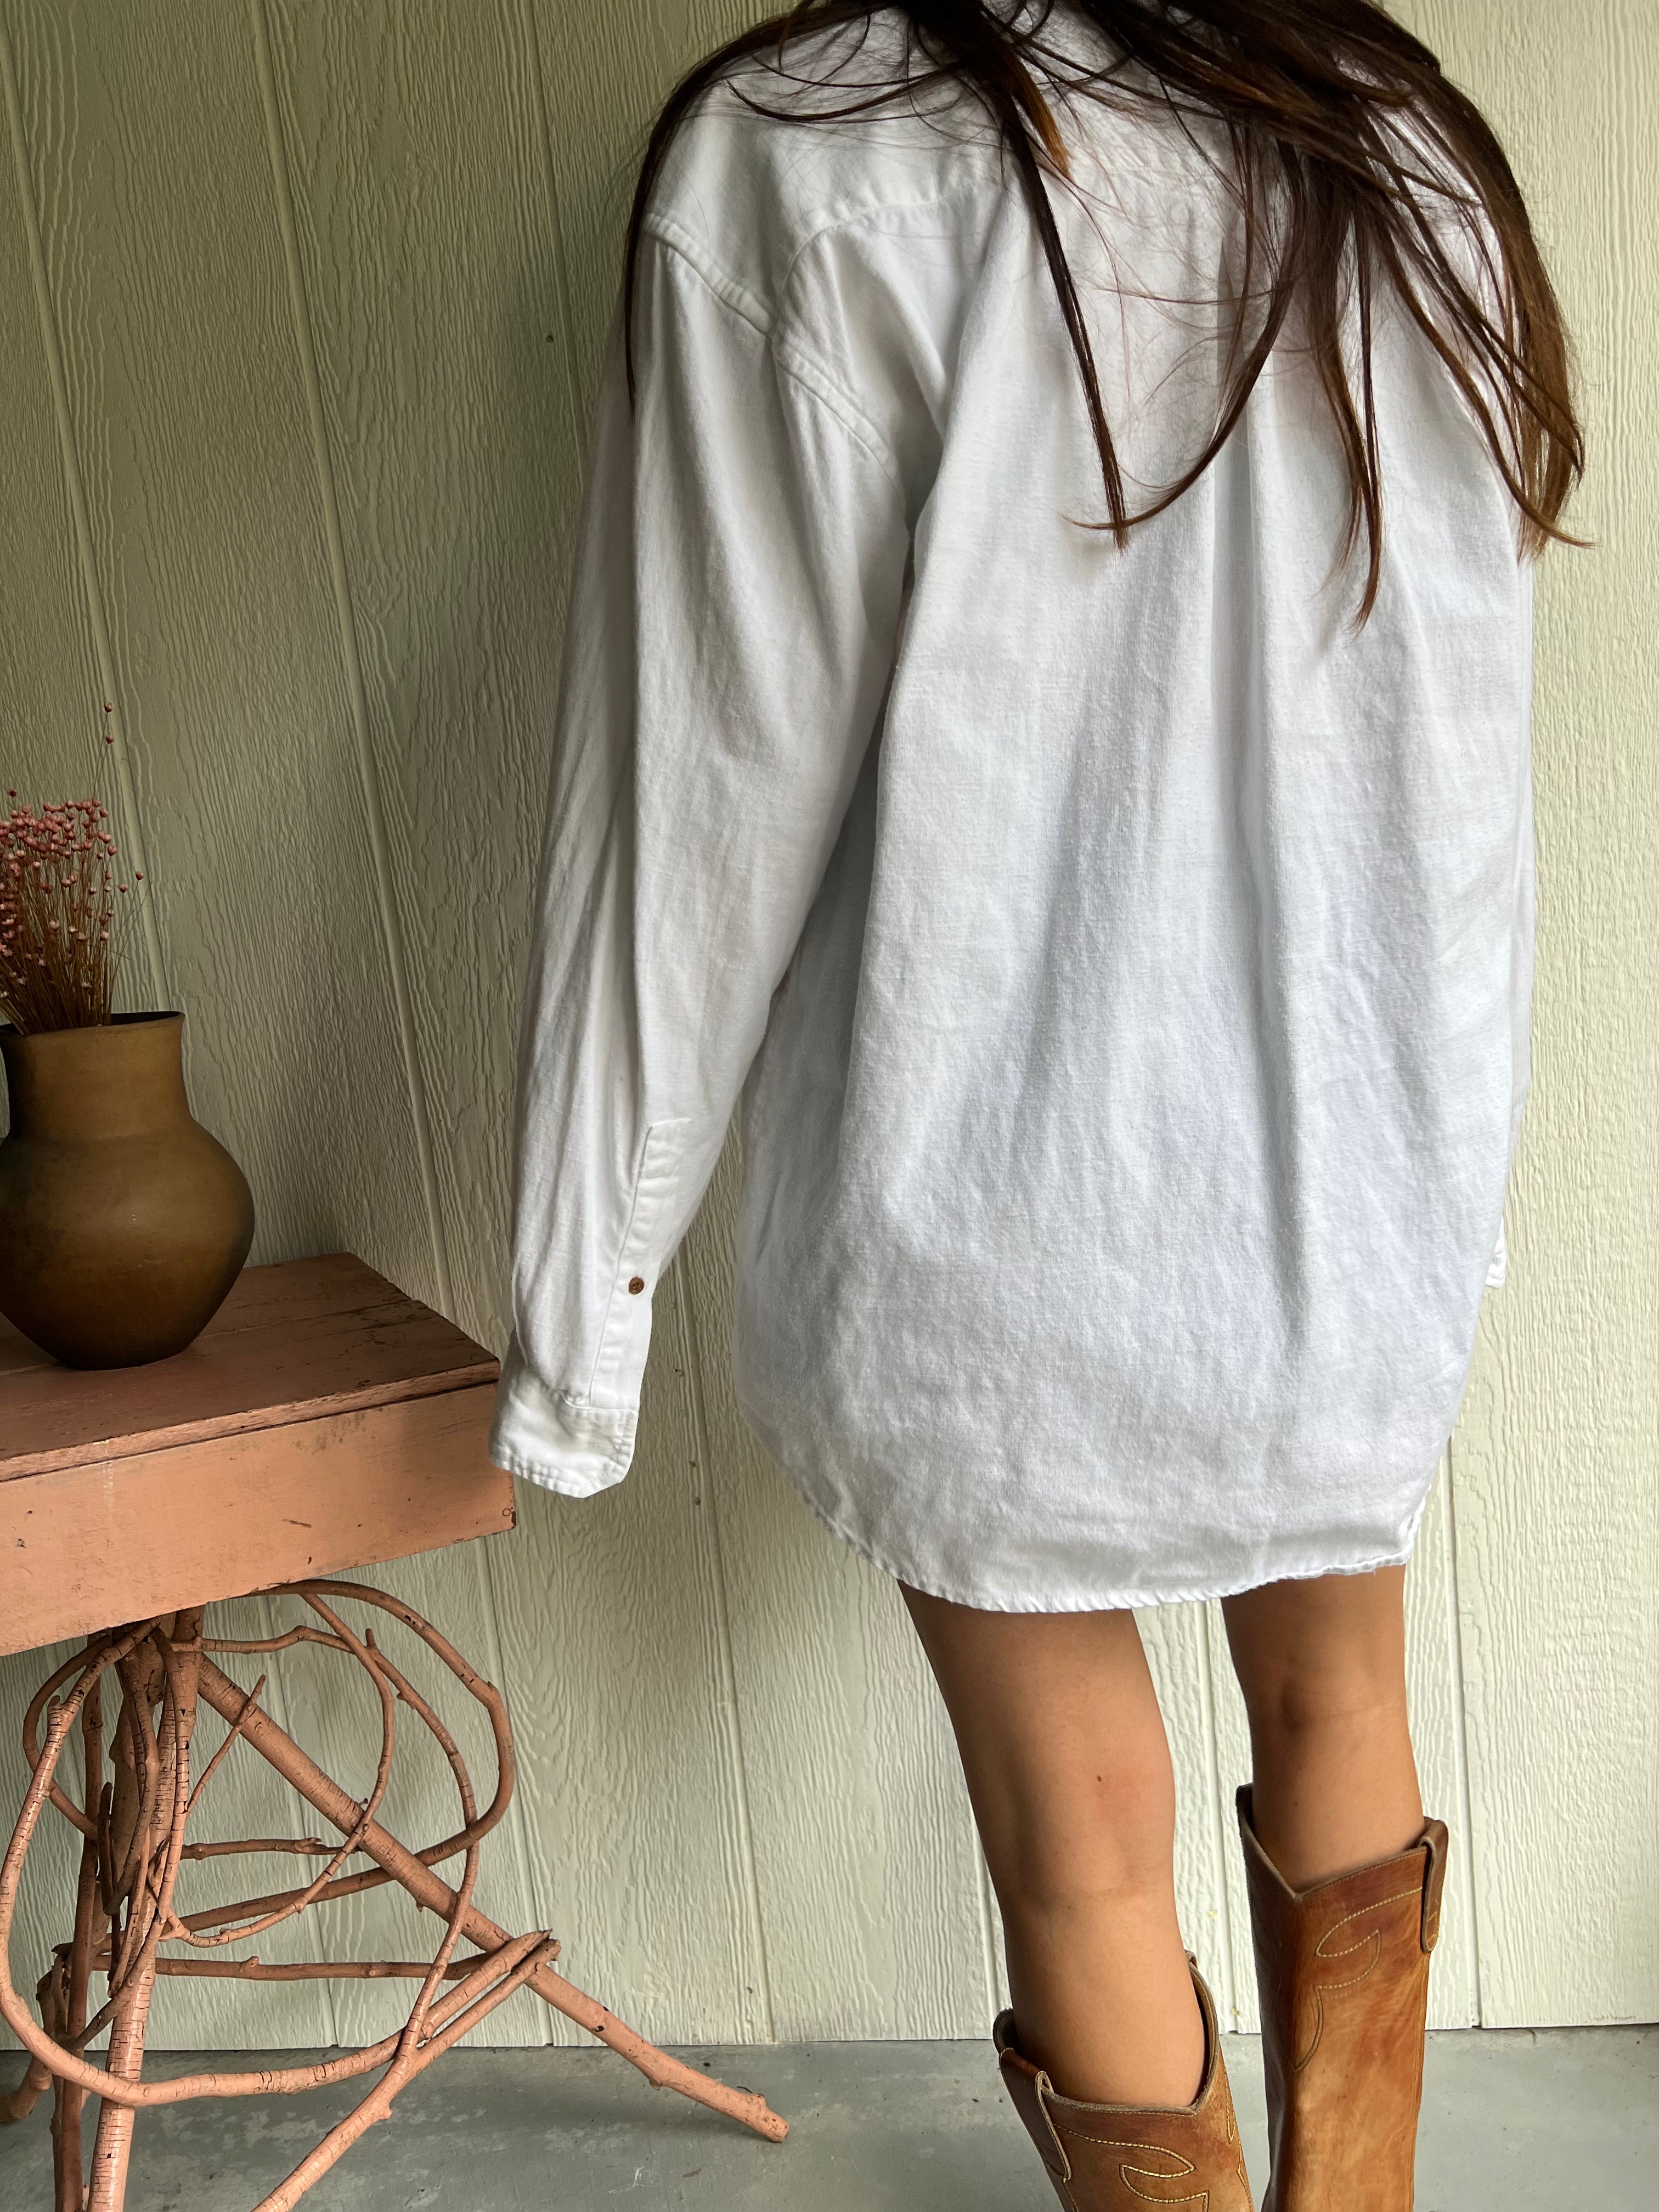 White Button Up Blouse